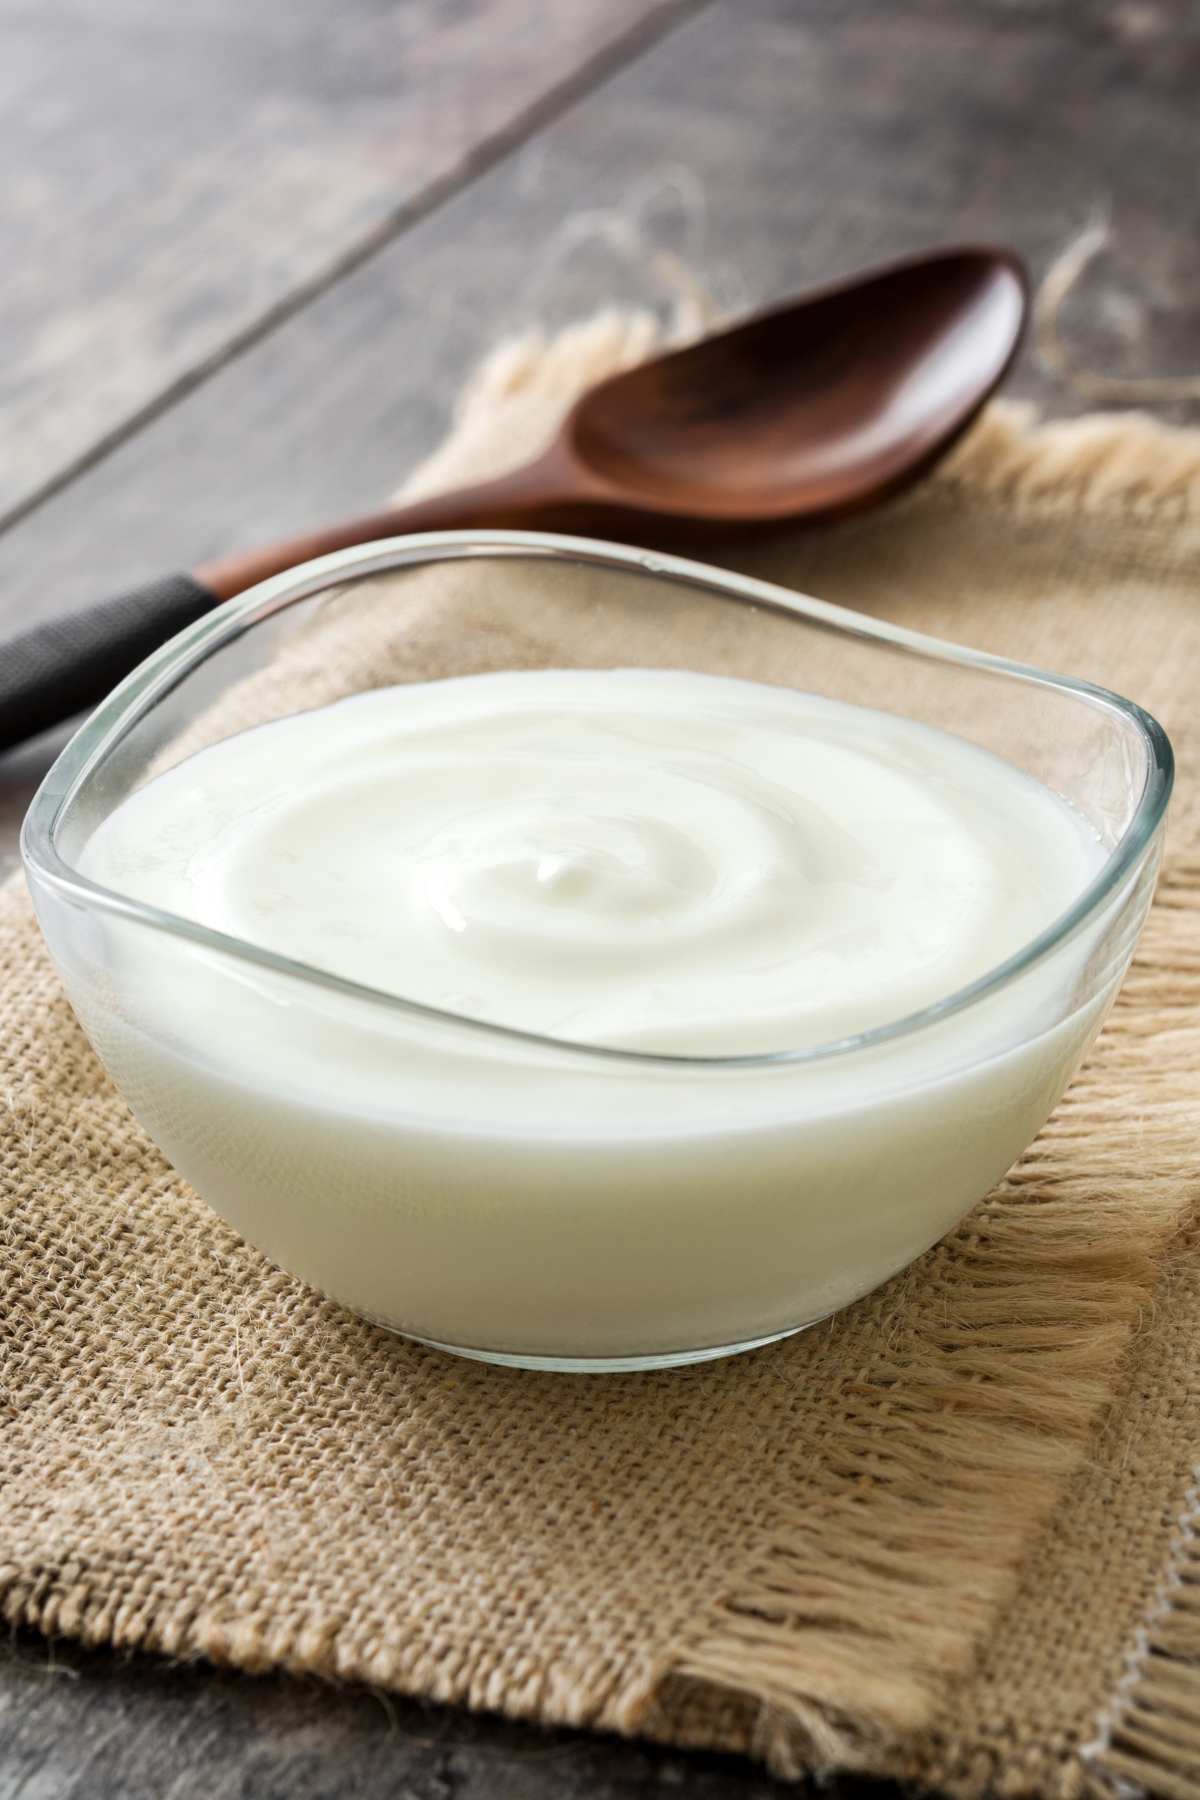 Not sure how many carbs are in Greek yogurt or if it’s a keto-friendly snack you can enjoy? Read on to learn more about this tasty food and whether or not it’s right for you.